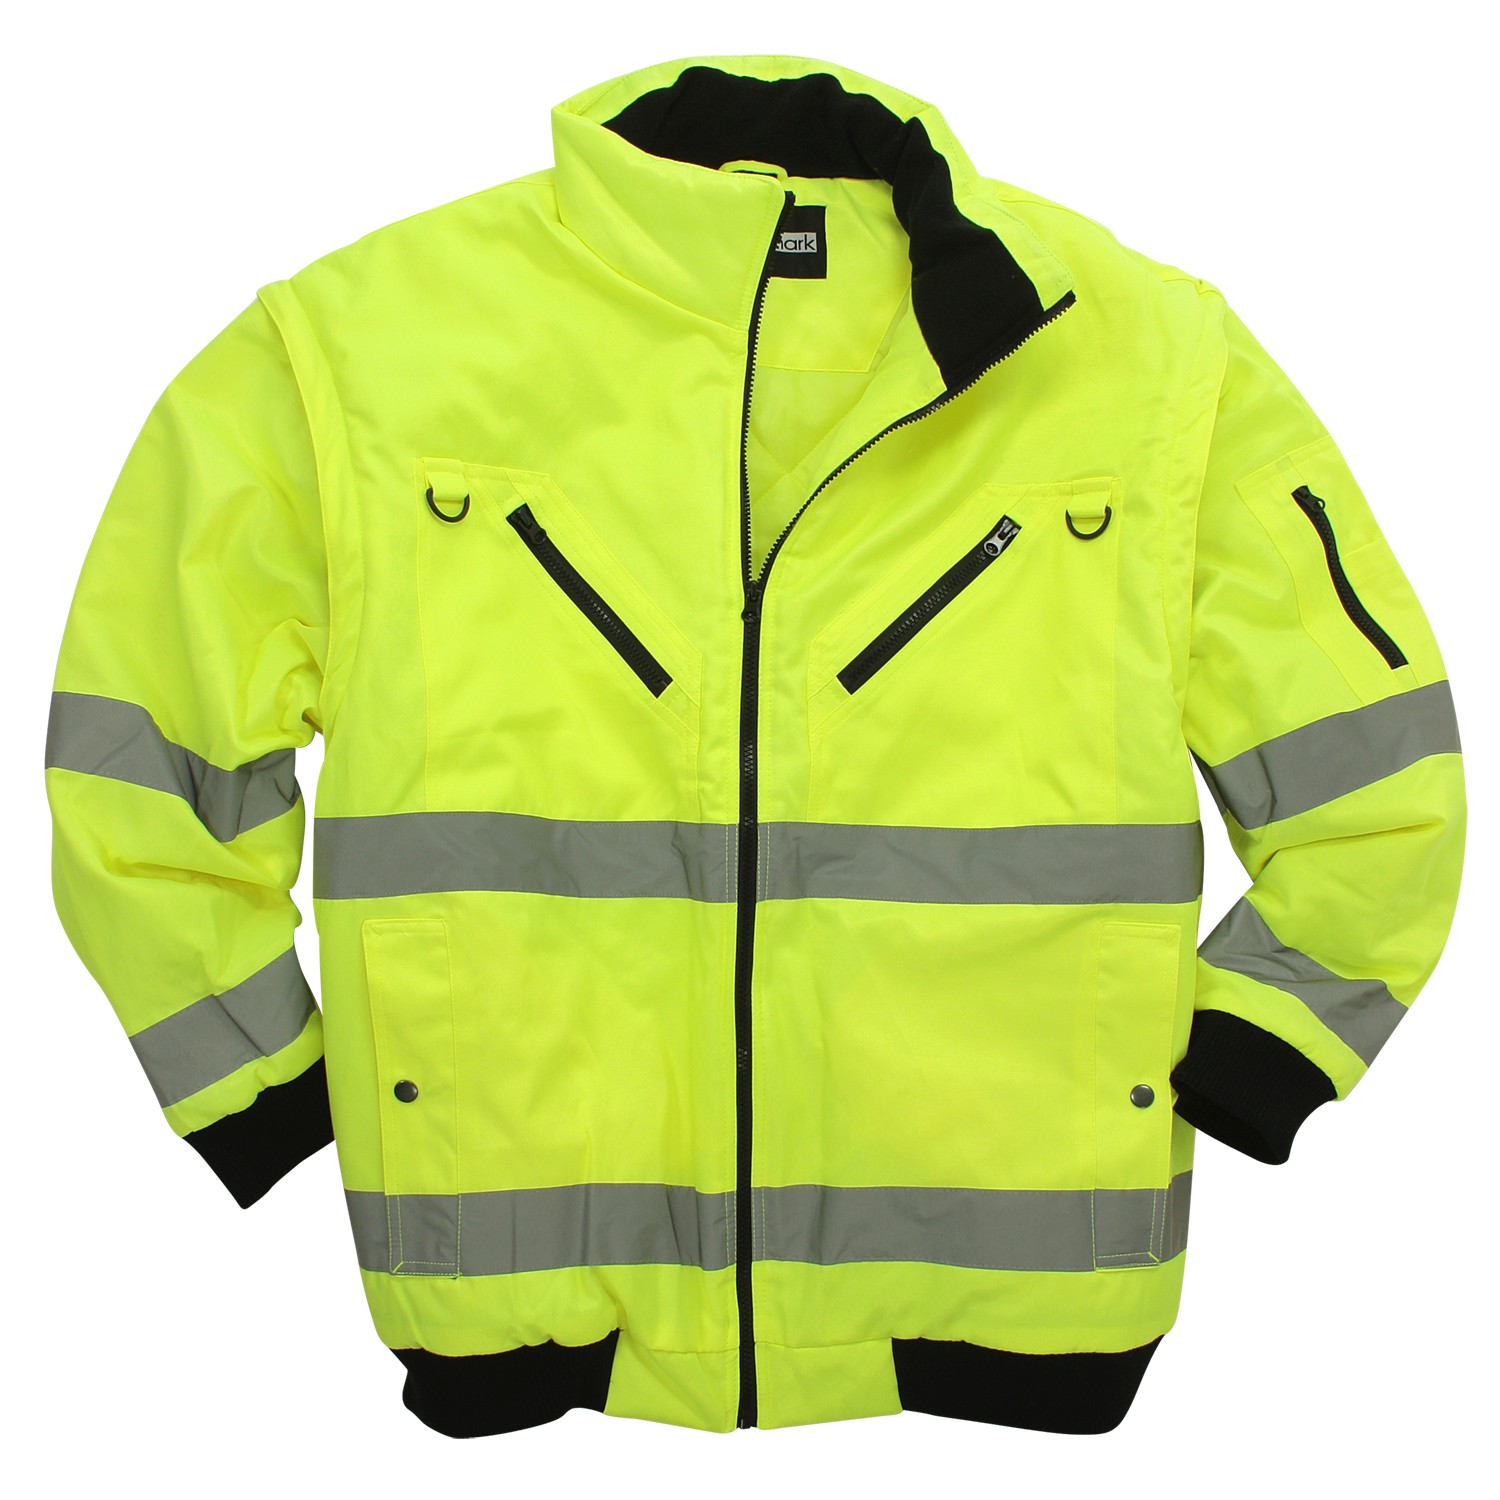 Working jacket in day-glo yellow by marc&mark in extra large sizes up to 10XL